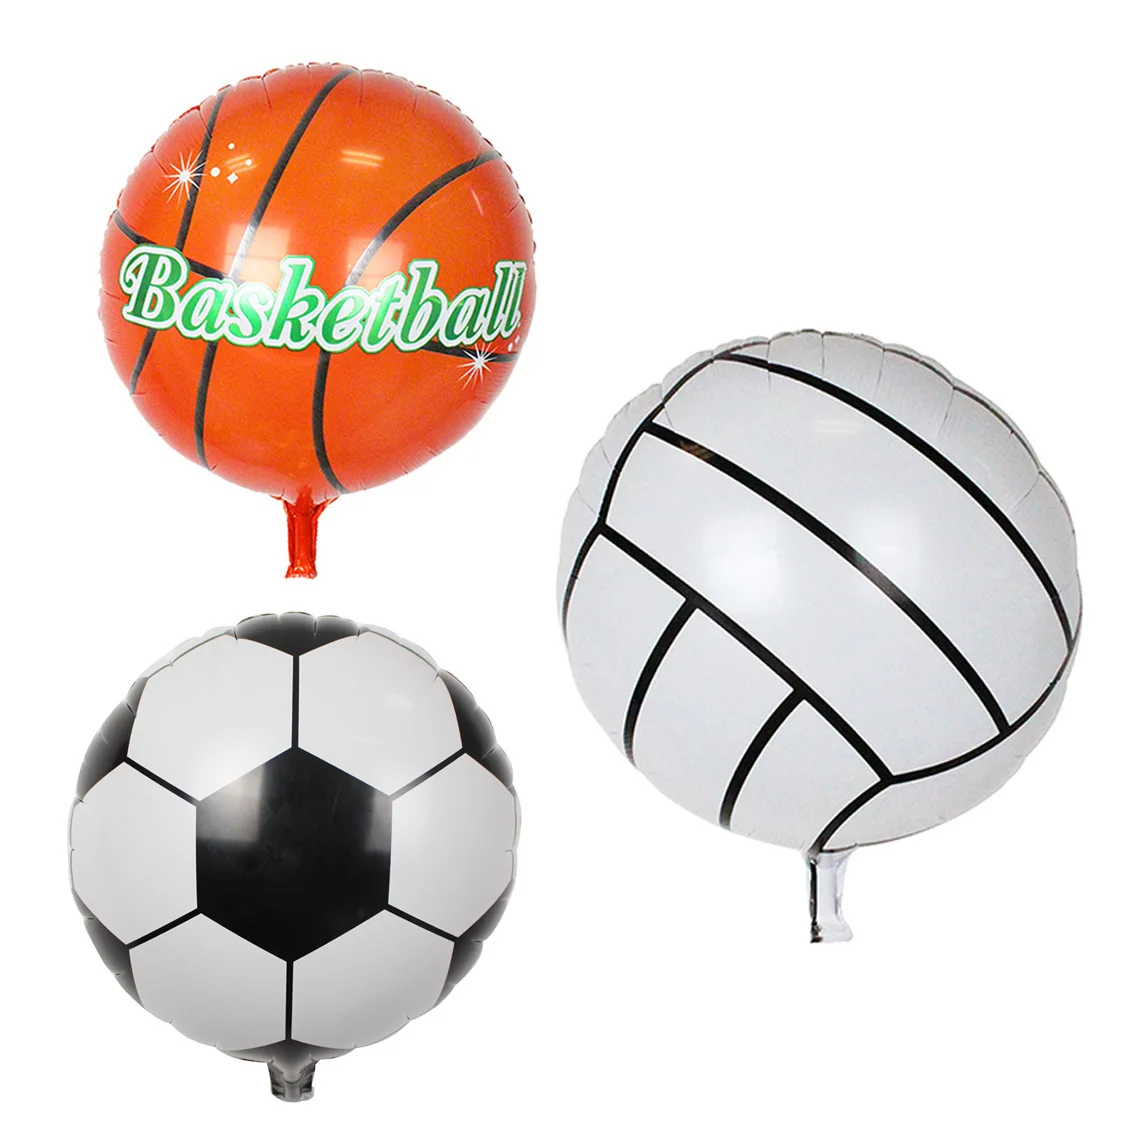 Us 0 71 50 Off 2017 New 18 Inch Football Balloons Basketball Volleyball Wholesale Wedding Party Decoration Birthday Gift For Children Kids Toys In